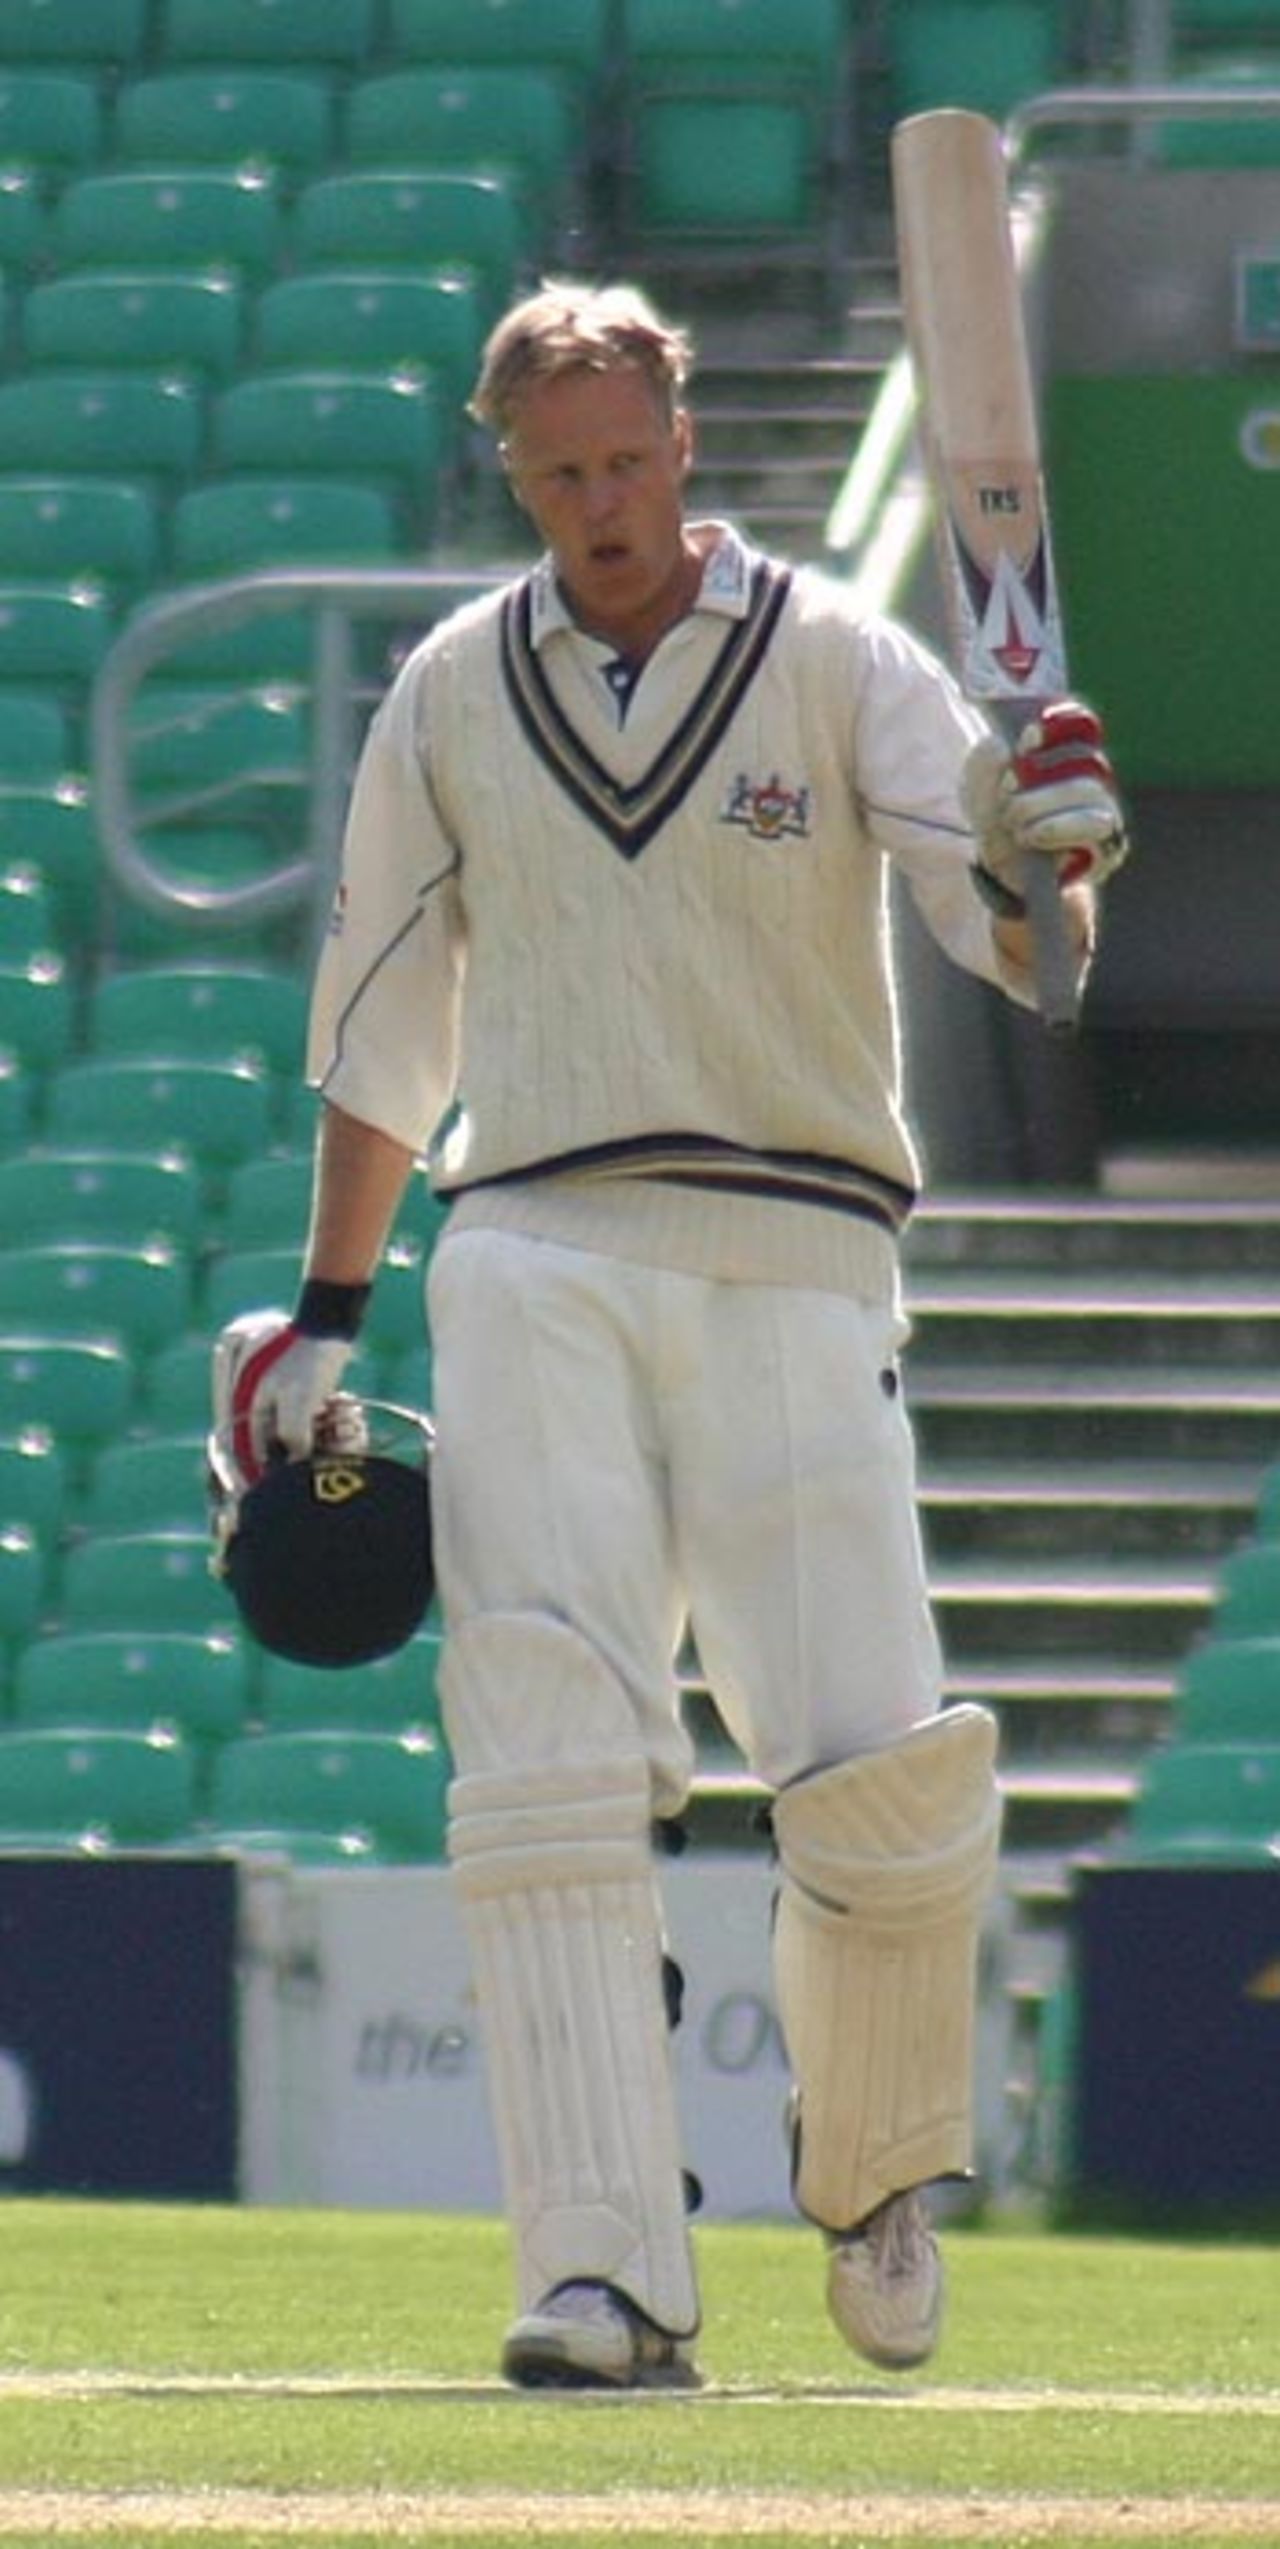 Phil Weston reaches his hundred, Surrey v Gloucestershire, The Oval, May 3, 2006